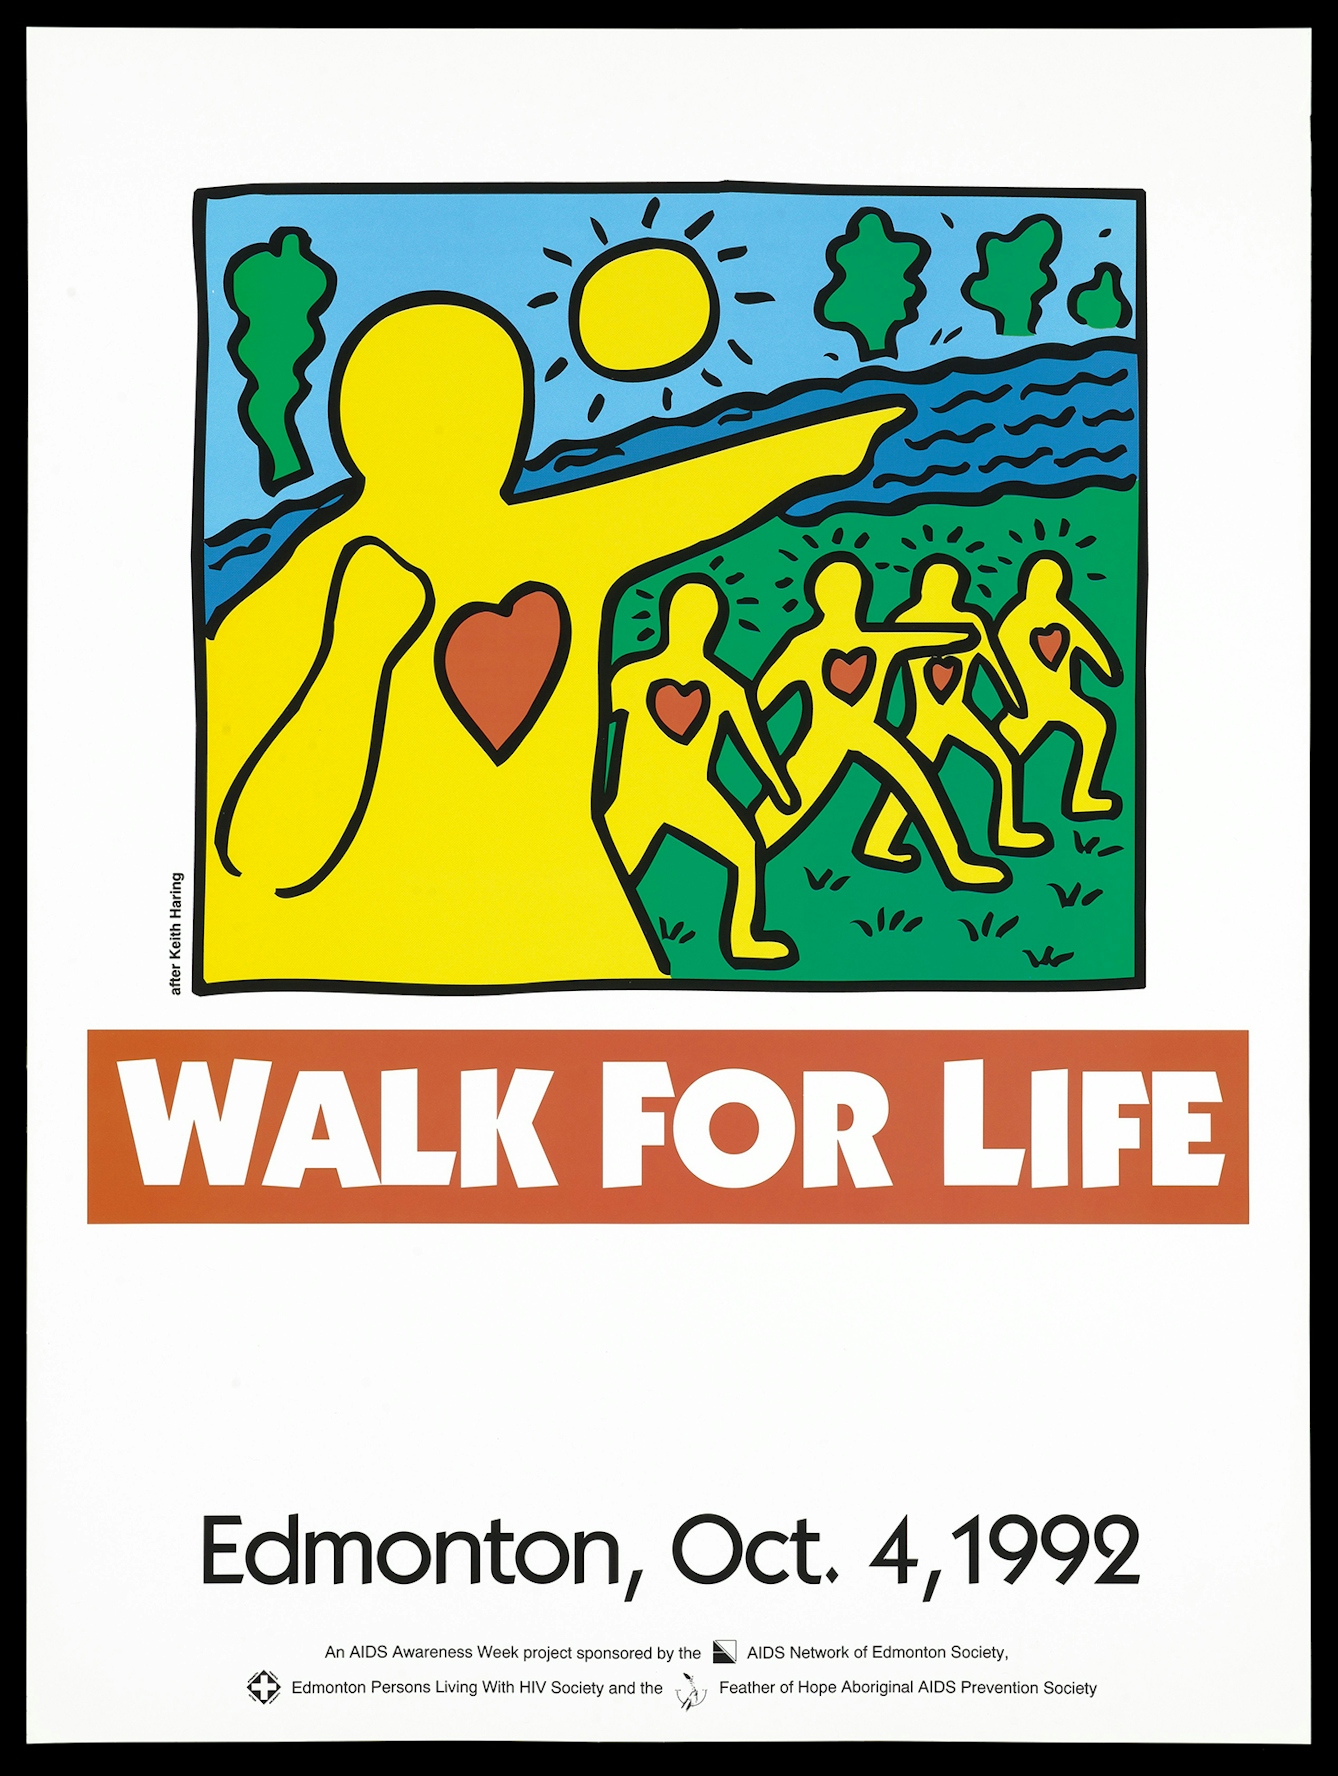 Yellow figures with red heart shapes on their chests stride across a landscape of field, river and trees. Two of the five figures are pointing ahead. A caption beneath the image reads "Walk for Life"  Edmonton Canada, Sunday Oct 4 1992.